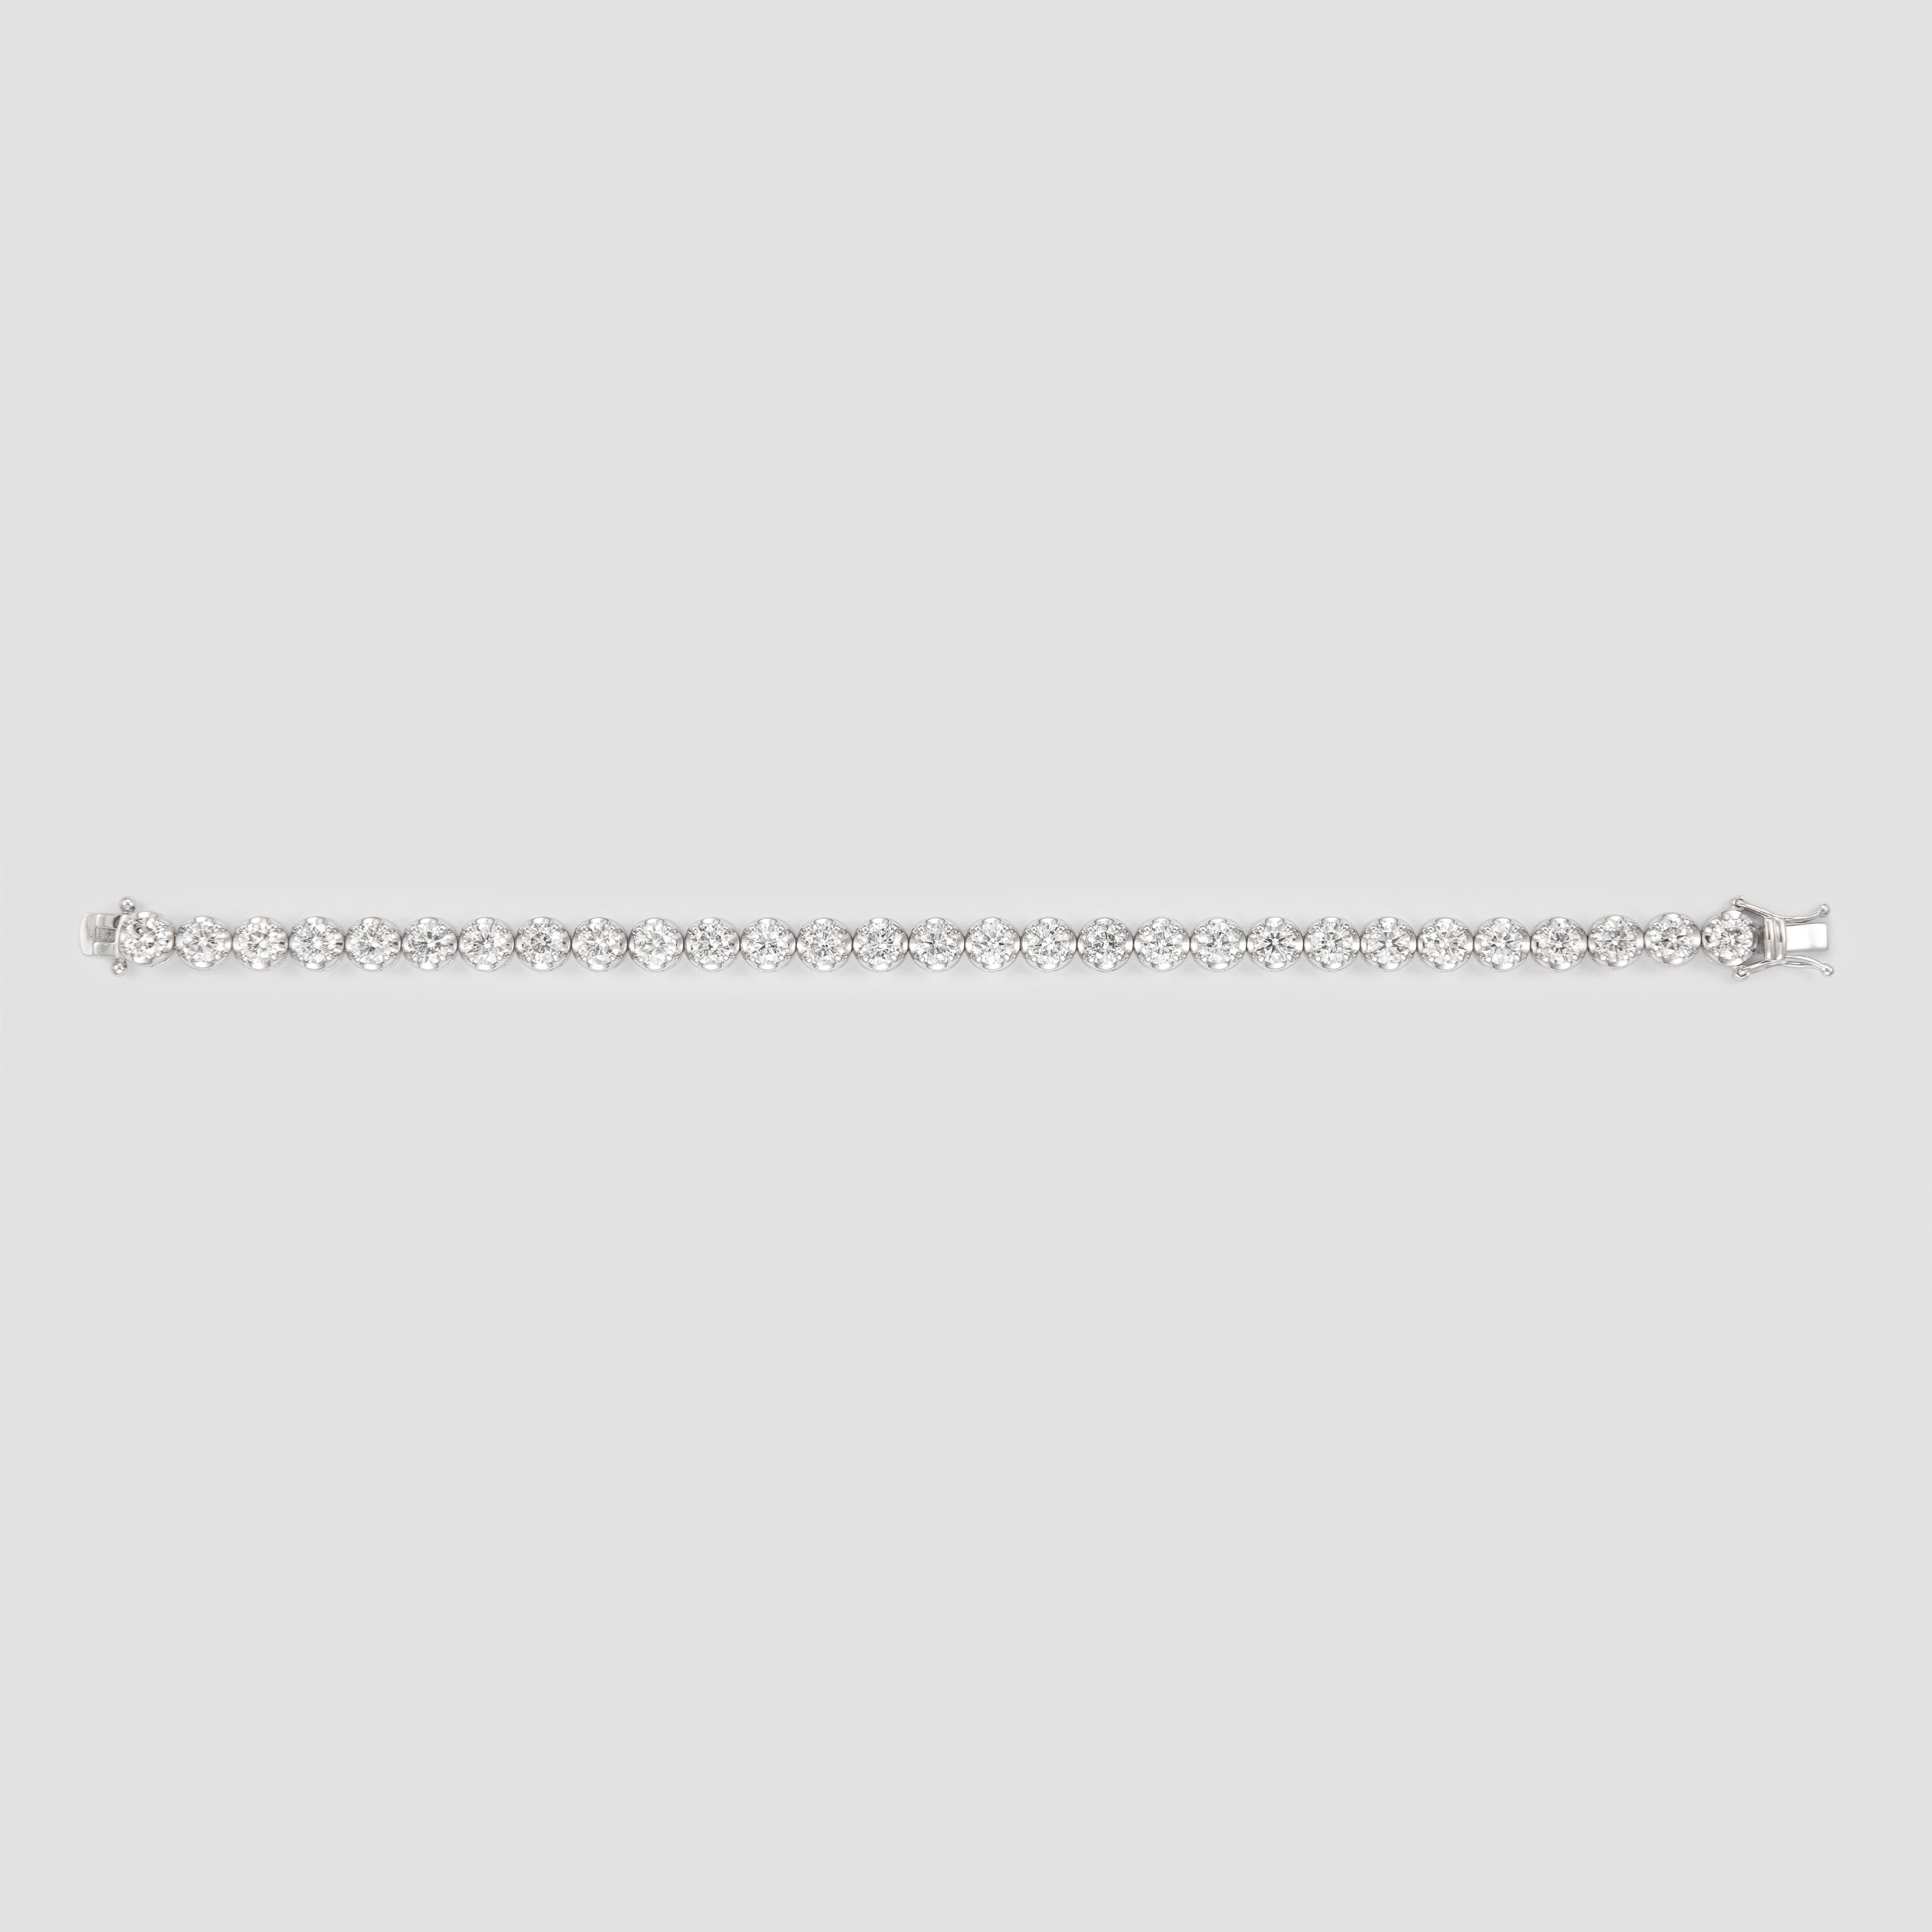 Exquisite and timeless diamonds tennis bracelet. By Alexander of Beverly Hills.
29 round brilliant diamonds, 9.56 carats total. Approximately GH color and SI clarity. Four prong set in 18k white gold.
Accommodated with an up to date appraisal by a